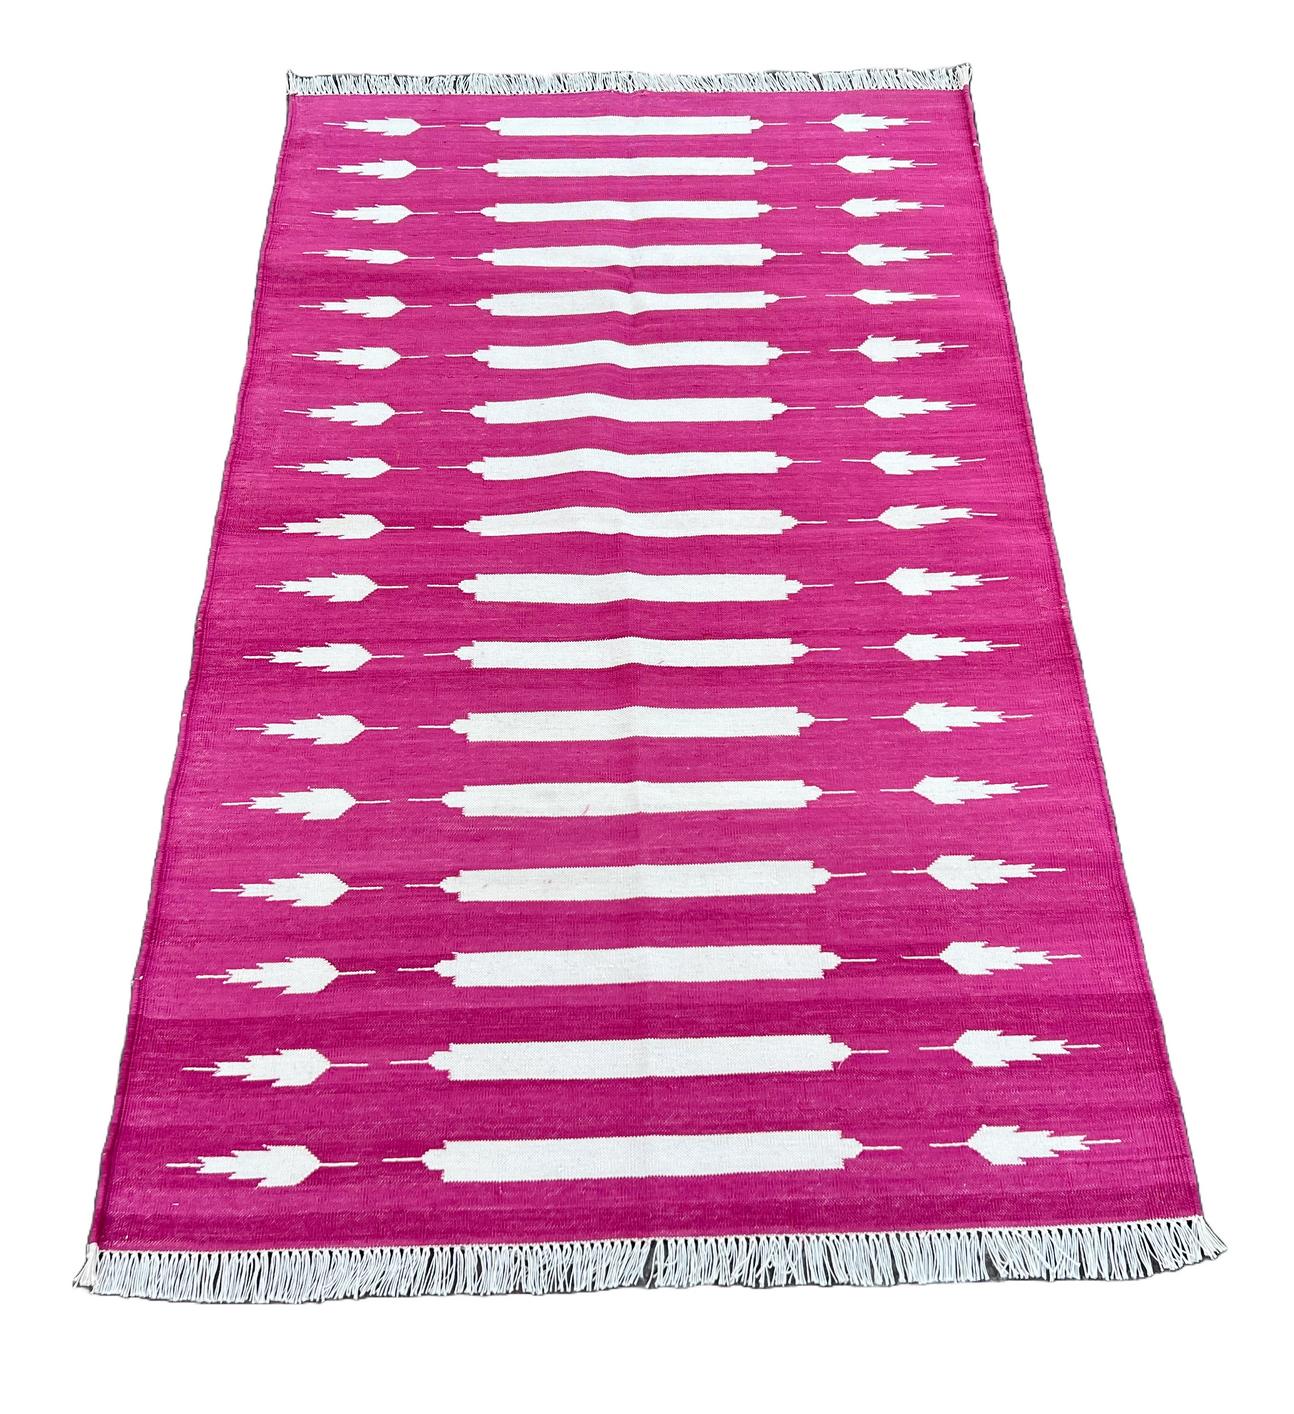 Handmade Cotton Area Flat Weave Rug, 3x5 Pink And White Striped Indian Dhurrie In New Condition For Sale In Jaipur, IN